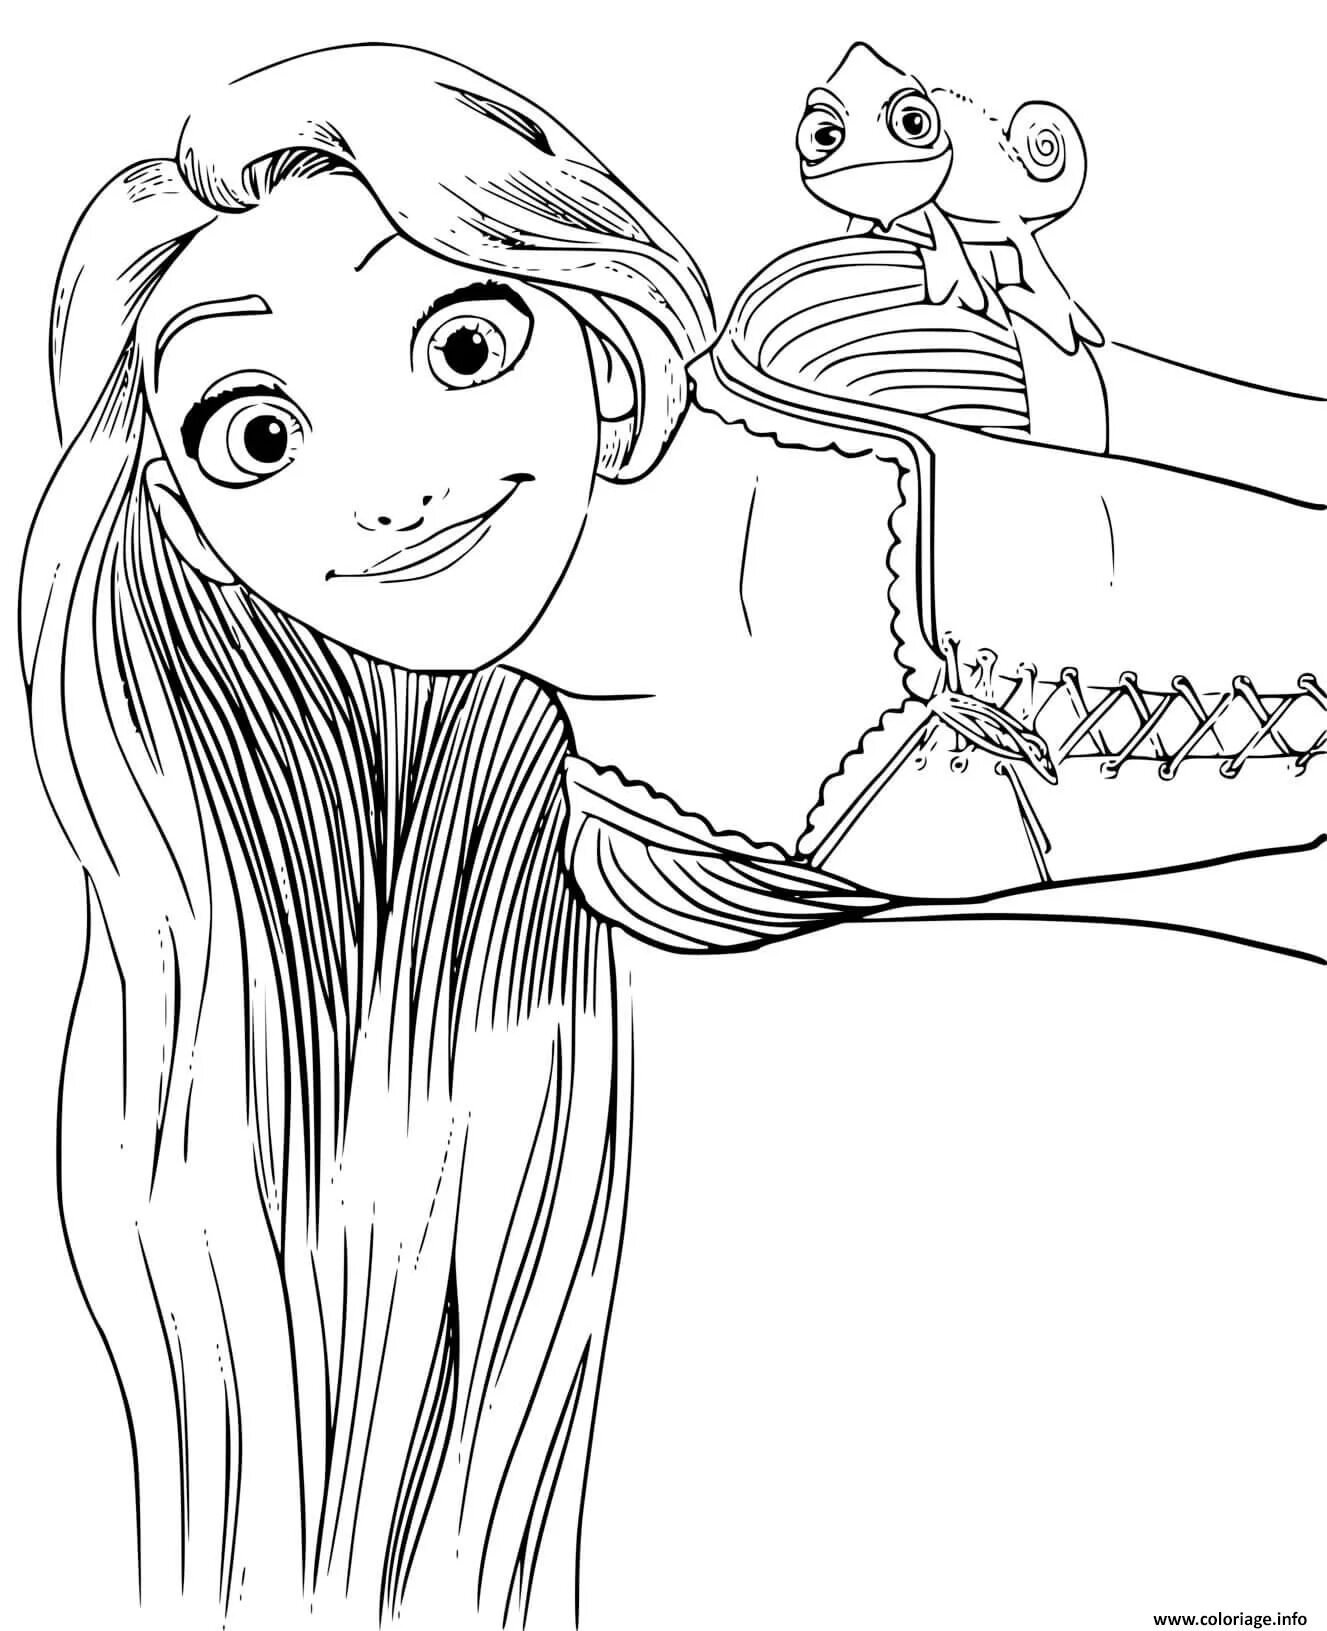 Exotic coloring page include princesses